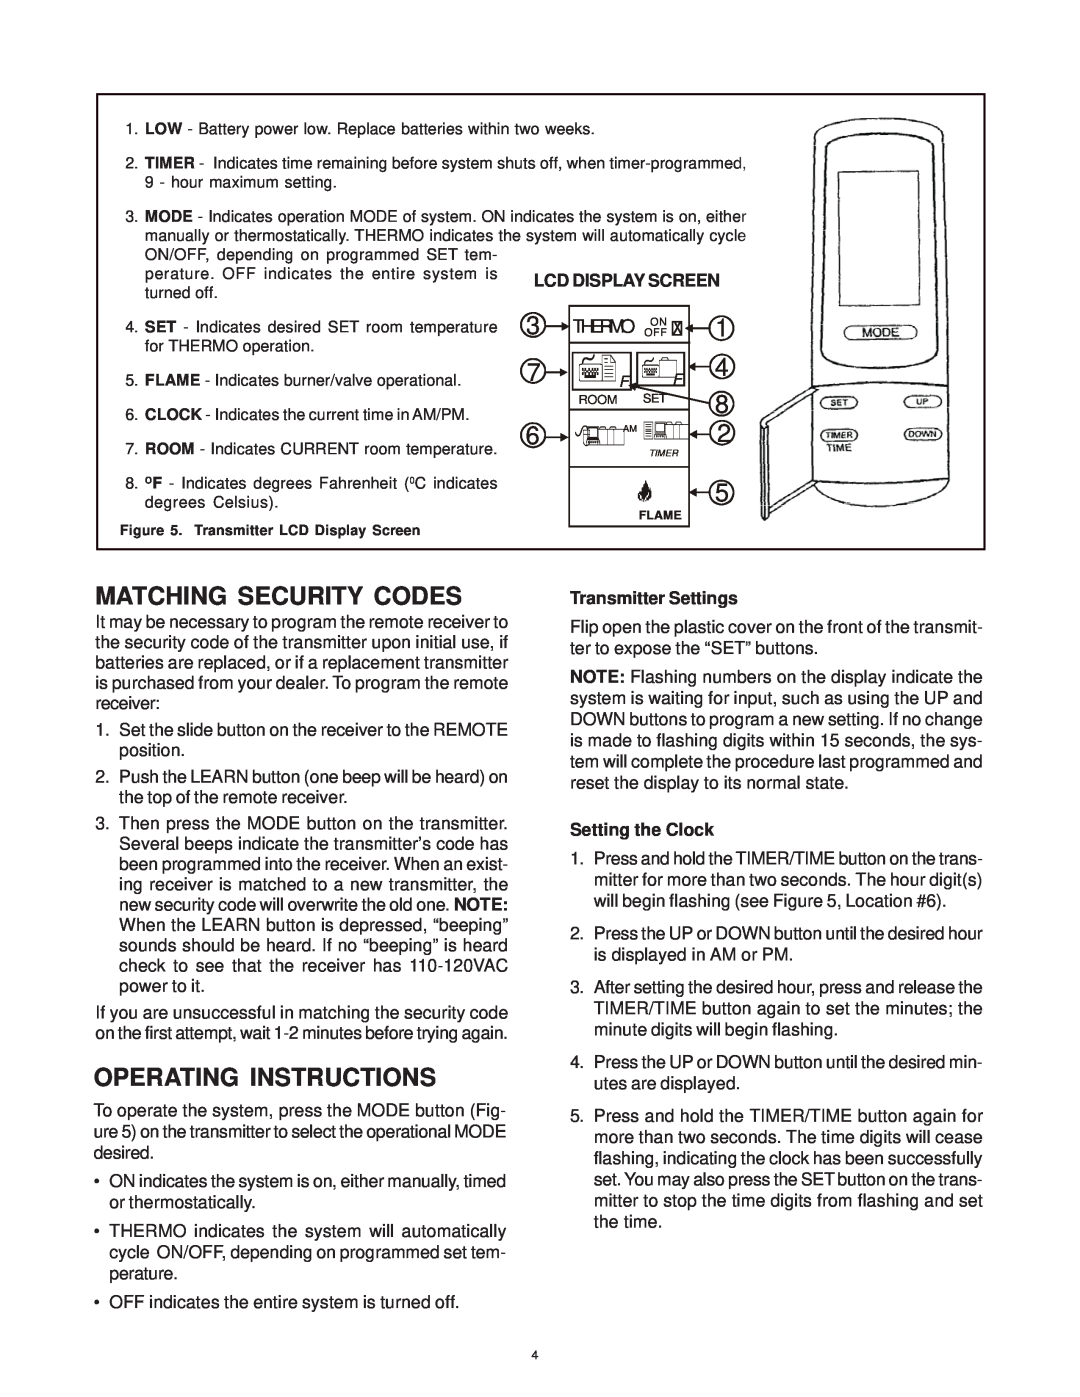 Hearth and Home Technologies SMART-STAT-II Matching Security Codes, Operating Instructions, Transmitter Settings, Thermo 